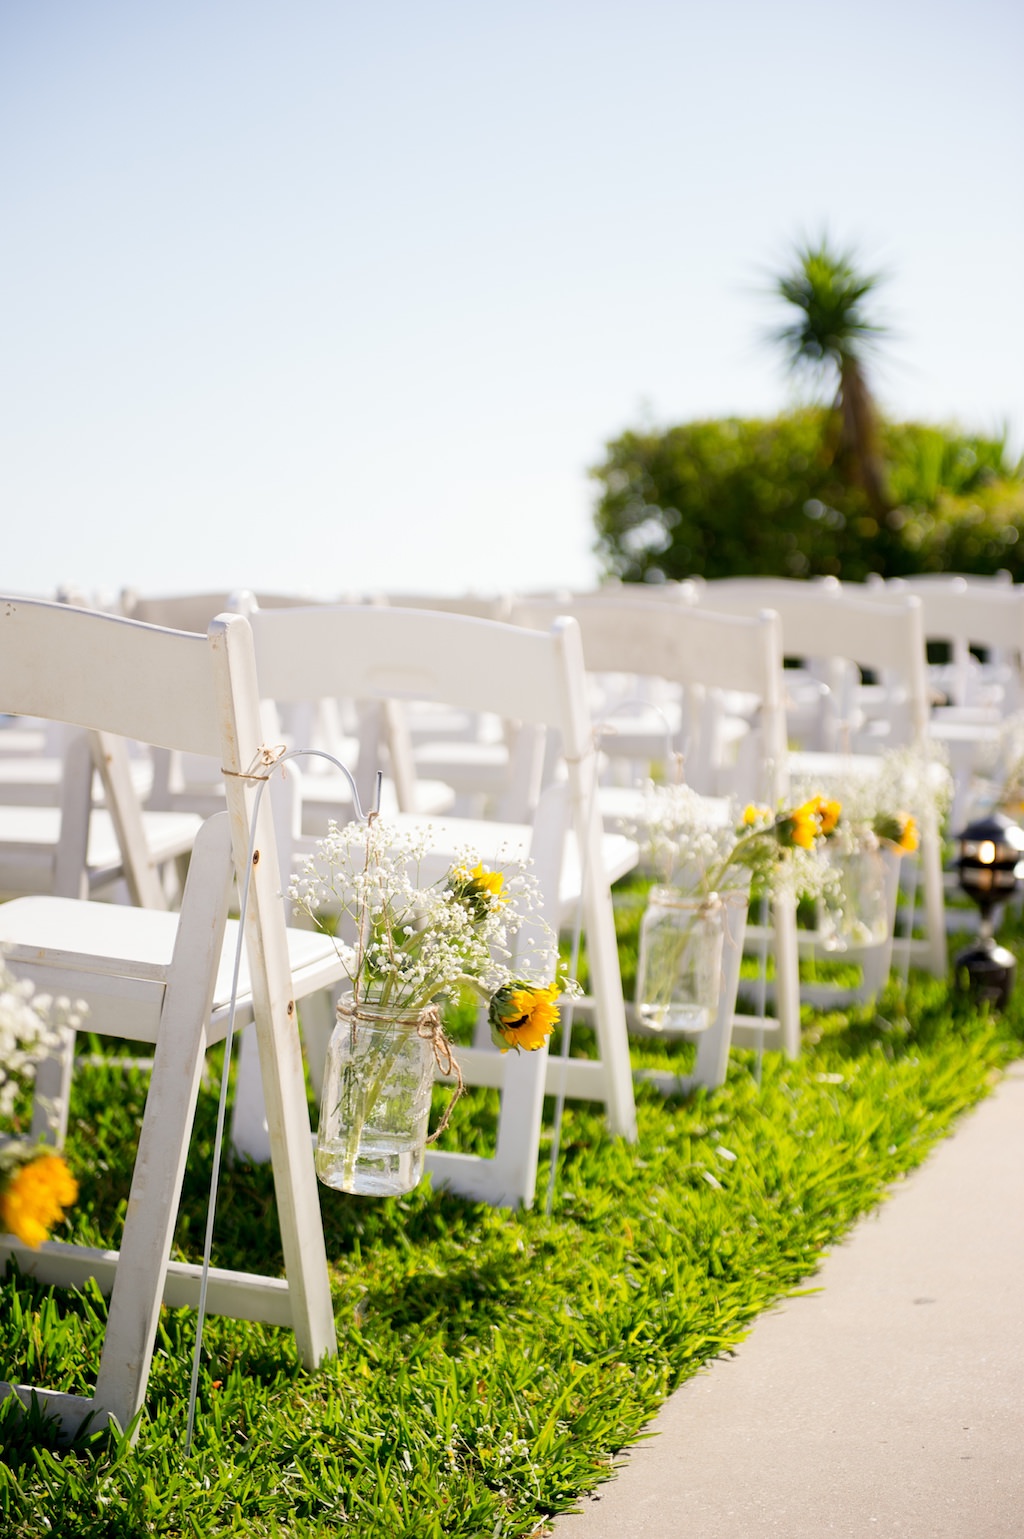 Rustic Outdoor Wedding Ceremony Decor, White Folding Chairs with Hanging Mason Jars, Yellow Sunflowers and Baby's Breathe Florals | Tampa Bay Photographer Andi Diamond Photography